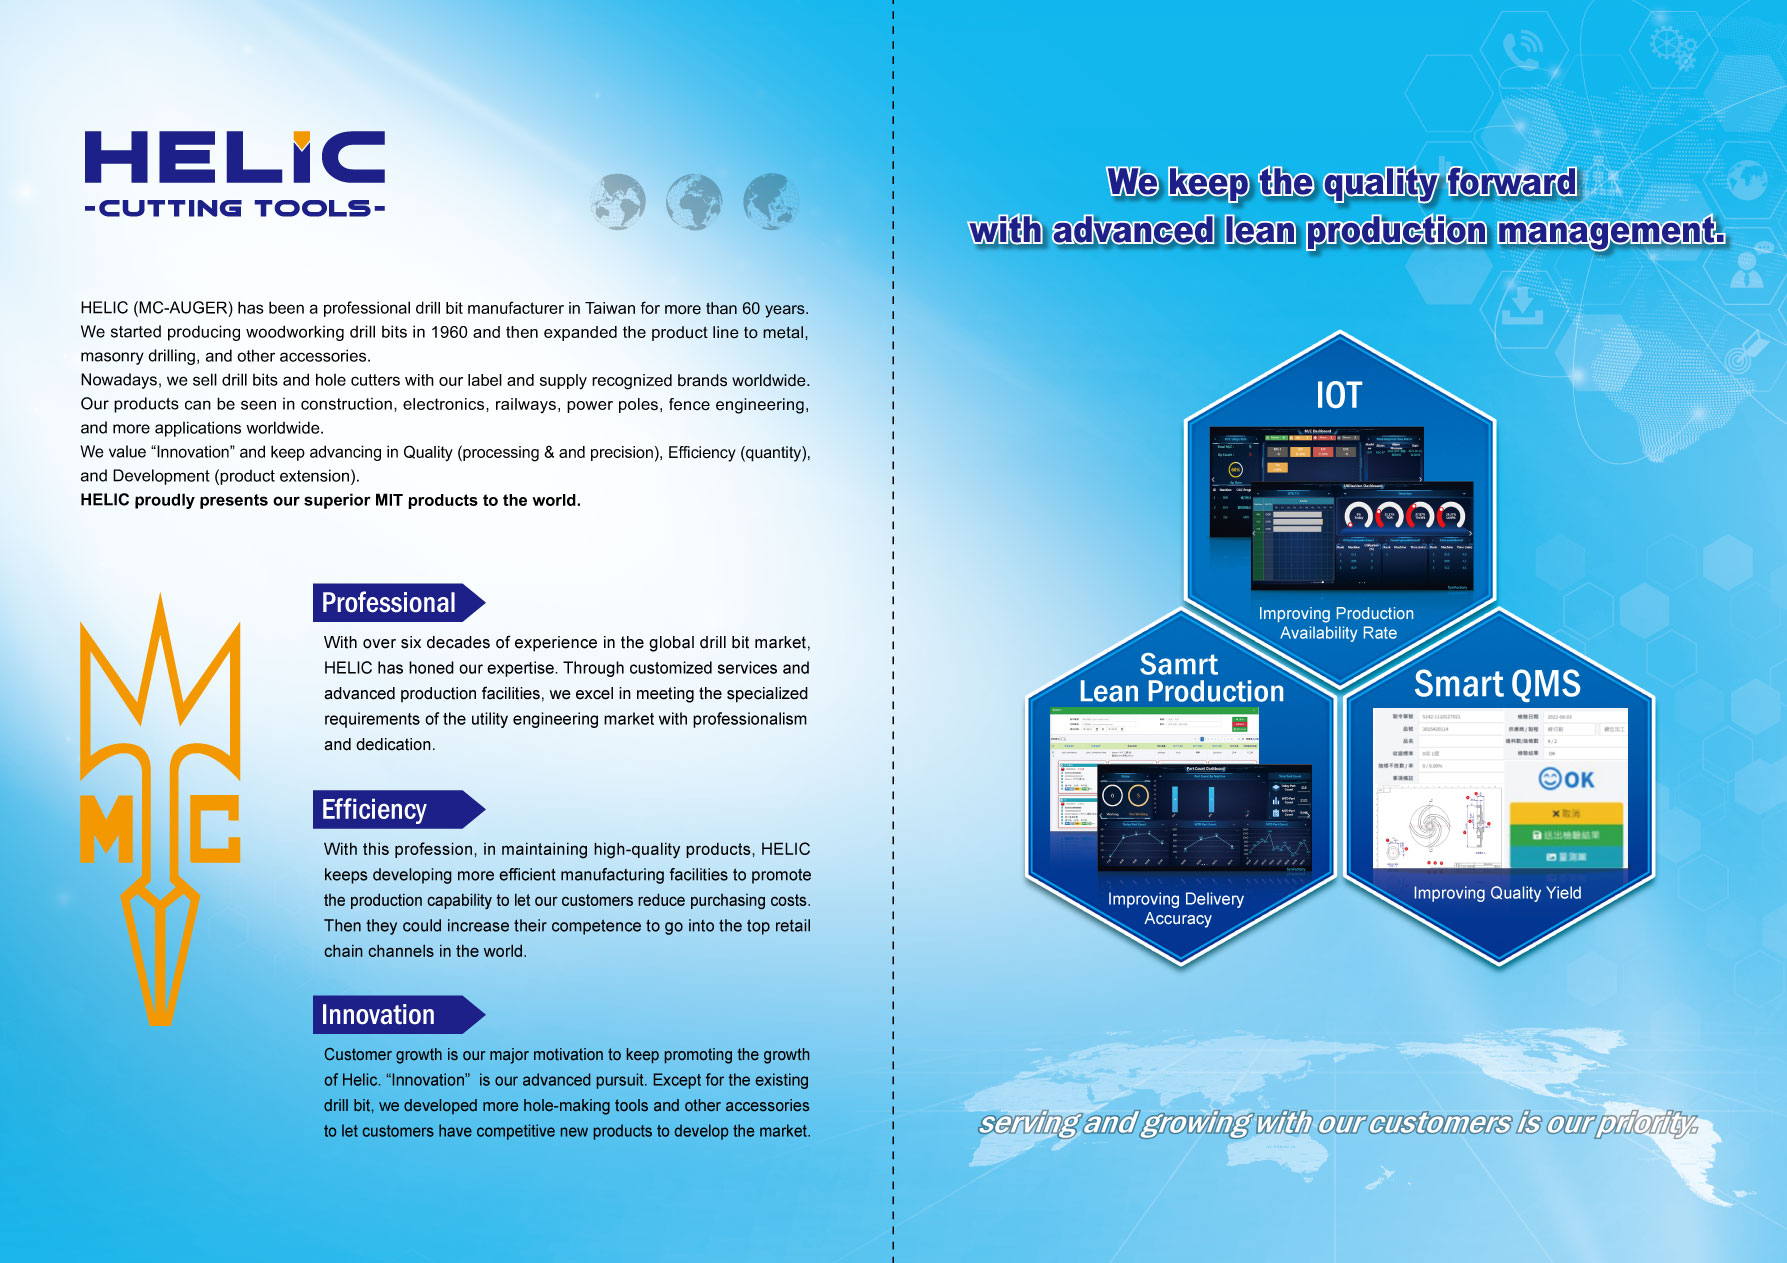 HELIC CUTTING TOOLS CO., LTD._Online Catalogues